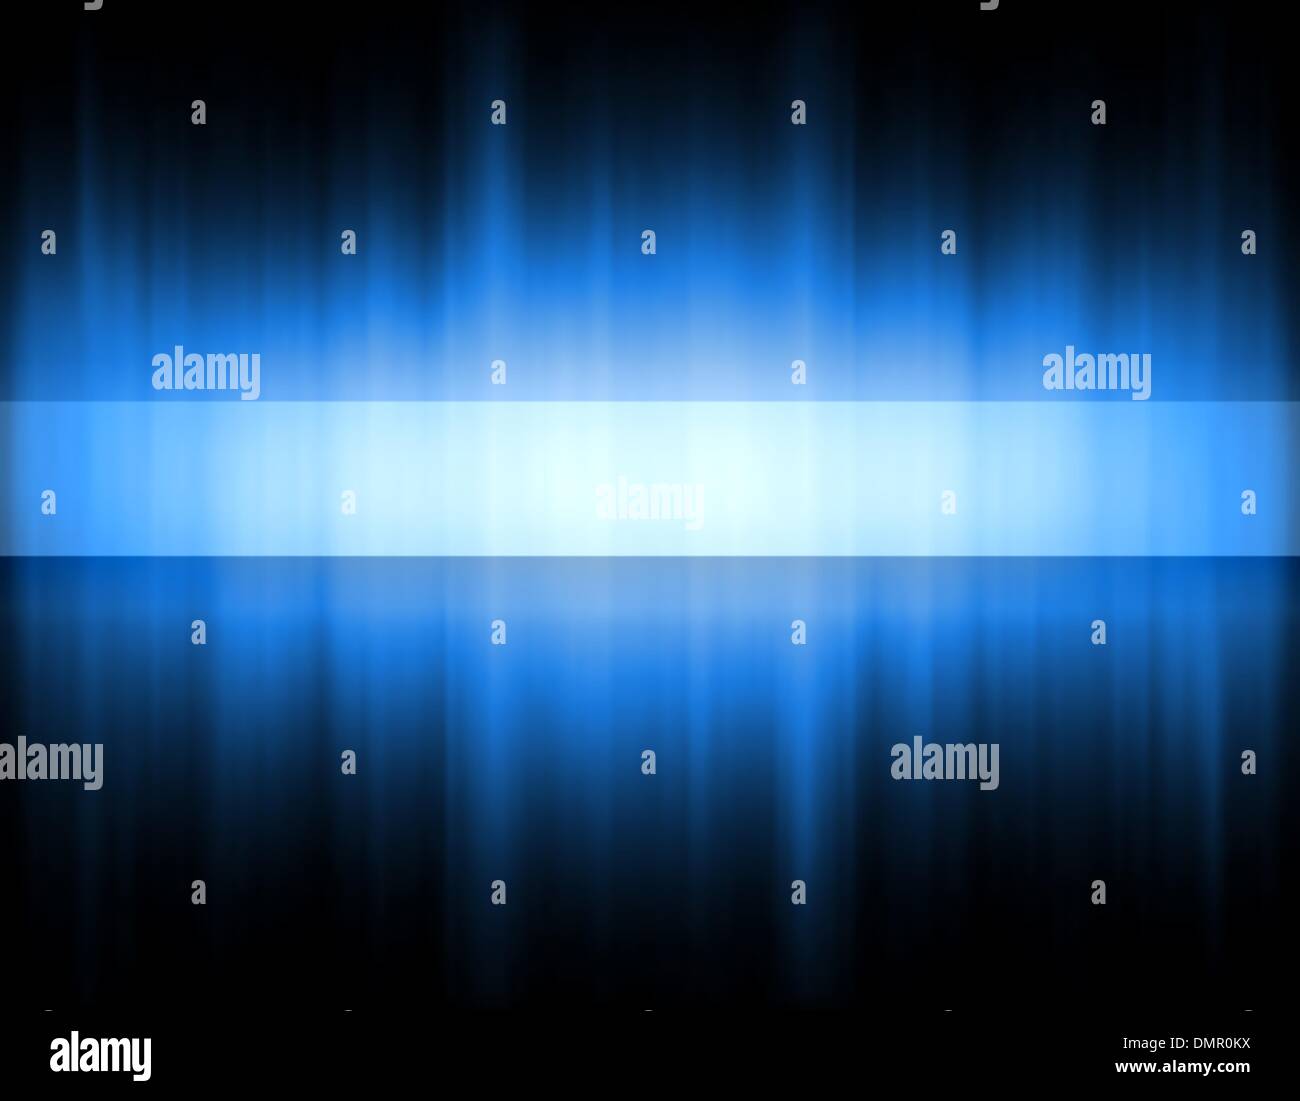 Blue band Stock Vector